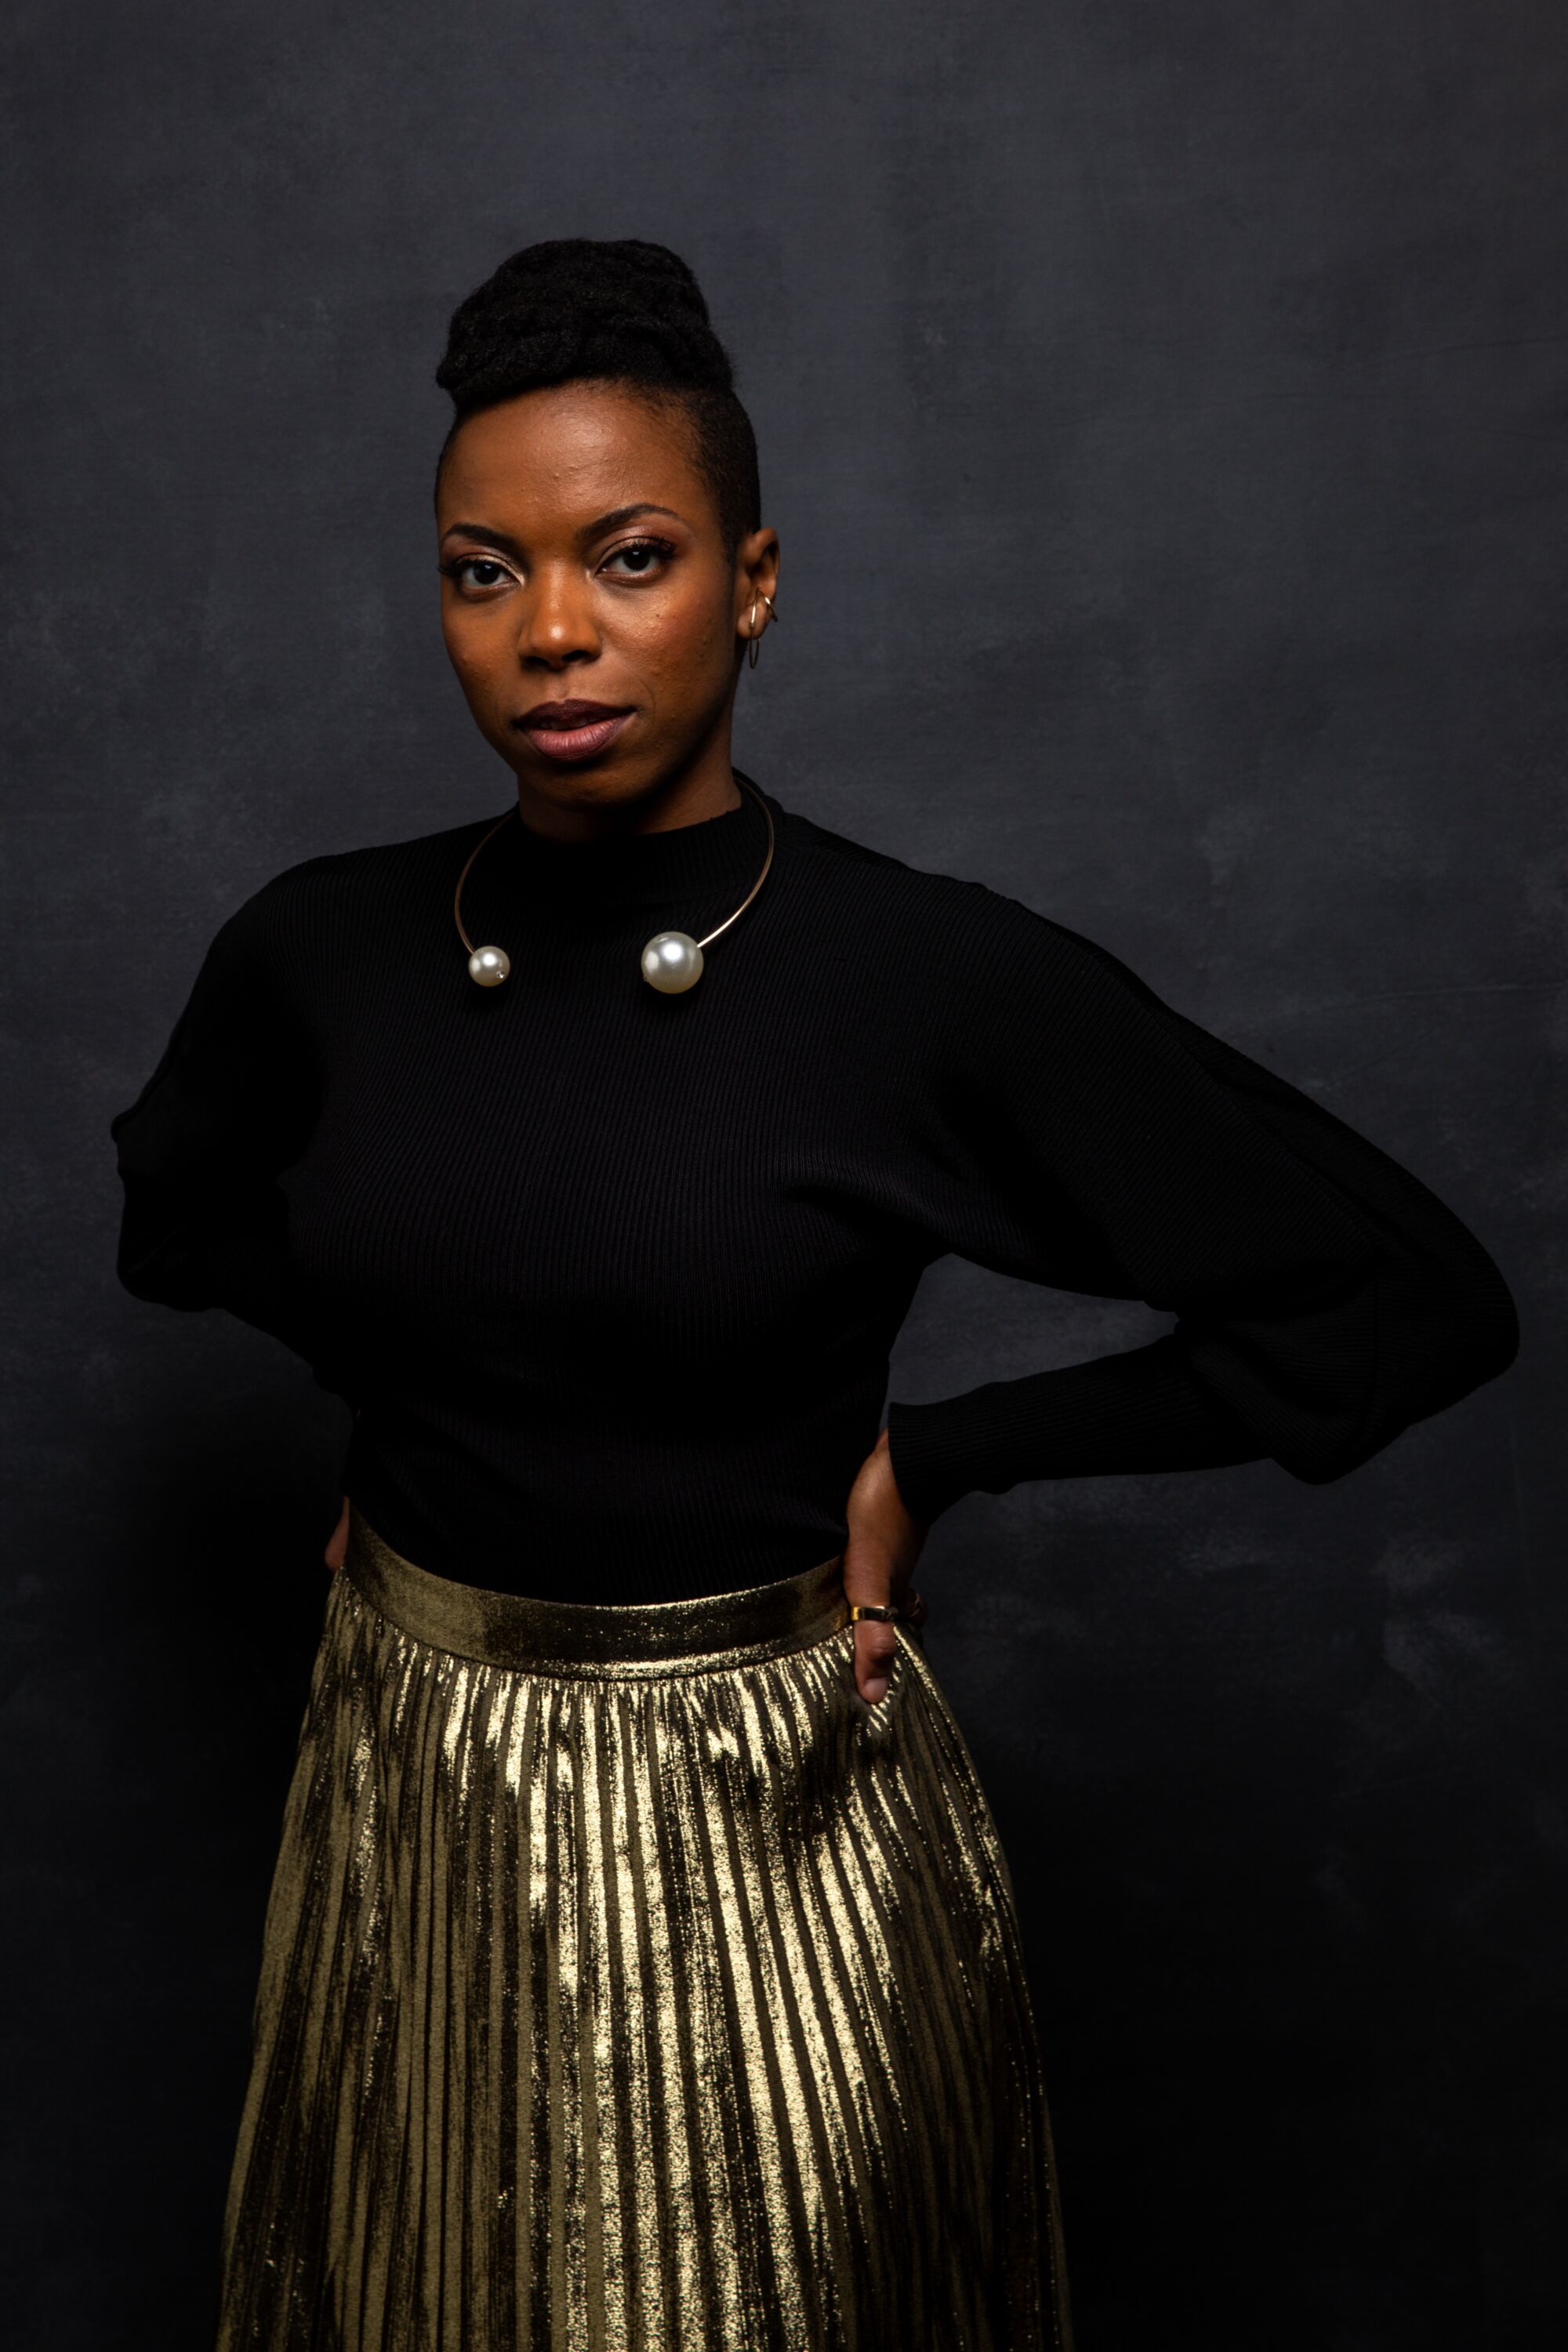 Actor Sasheer Zamata from “Spree,” photographed in the L.A. Times Studio at the Sundance Film Festival.